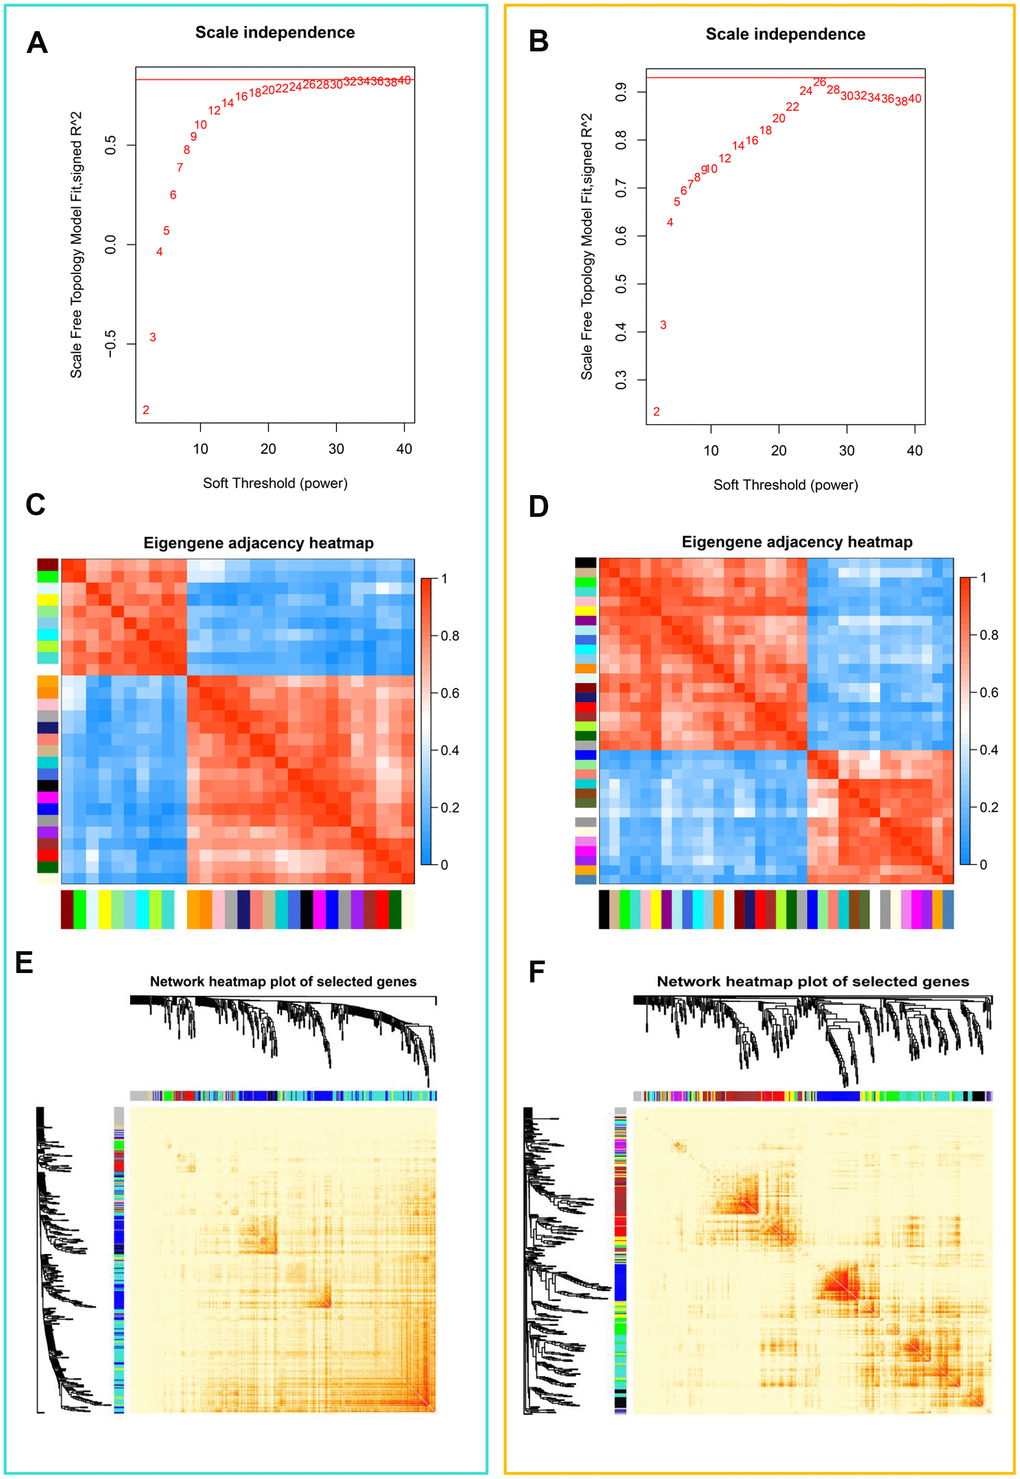 Weighted gene co-expression network analysis (WGCNA) of genes in teratozoospermia. (A) Analysis of the scale-free fit index for various soft thresholding powers (β) from the dataset GSE6872. (B) Analysis of the scale-free fit index for various soft thresholding powers (β) from the dataset GSE6967. (C) Heatmap plot of the adjacencies in the eigengene network from the dataset GSE6872. Each row and column in the heatmap corresponds to one module eigengene (labeled by color). In the heatmap, blue color represents low adjacency (negative correlation), while red represents high adjacency (positive correlation). Squares of red color along the diagonal are the meta-modules. (D) Heatmap plot of the adjacencies in the eigengene network from the dataset GSE6967. (E) Heat map plot shows the topological overlap matrix (TOM) among randomly selected 400 genes from the dataset GSE6872. Light color shows low overlap, and red color indicates higher overlap. The left side and the top side show the gene dendrogram and module assignment. (F) Heat map plot shows the topological overlap matrix (TOM) among randomly selected 400 genes from the dataset GSE6967.